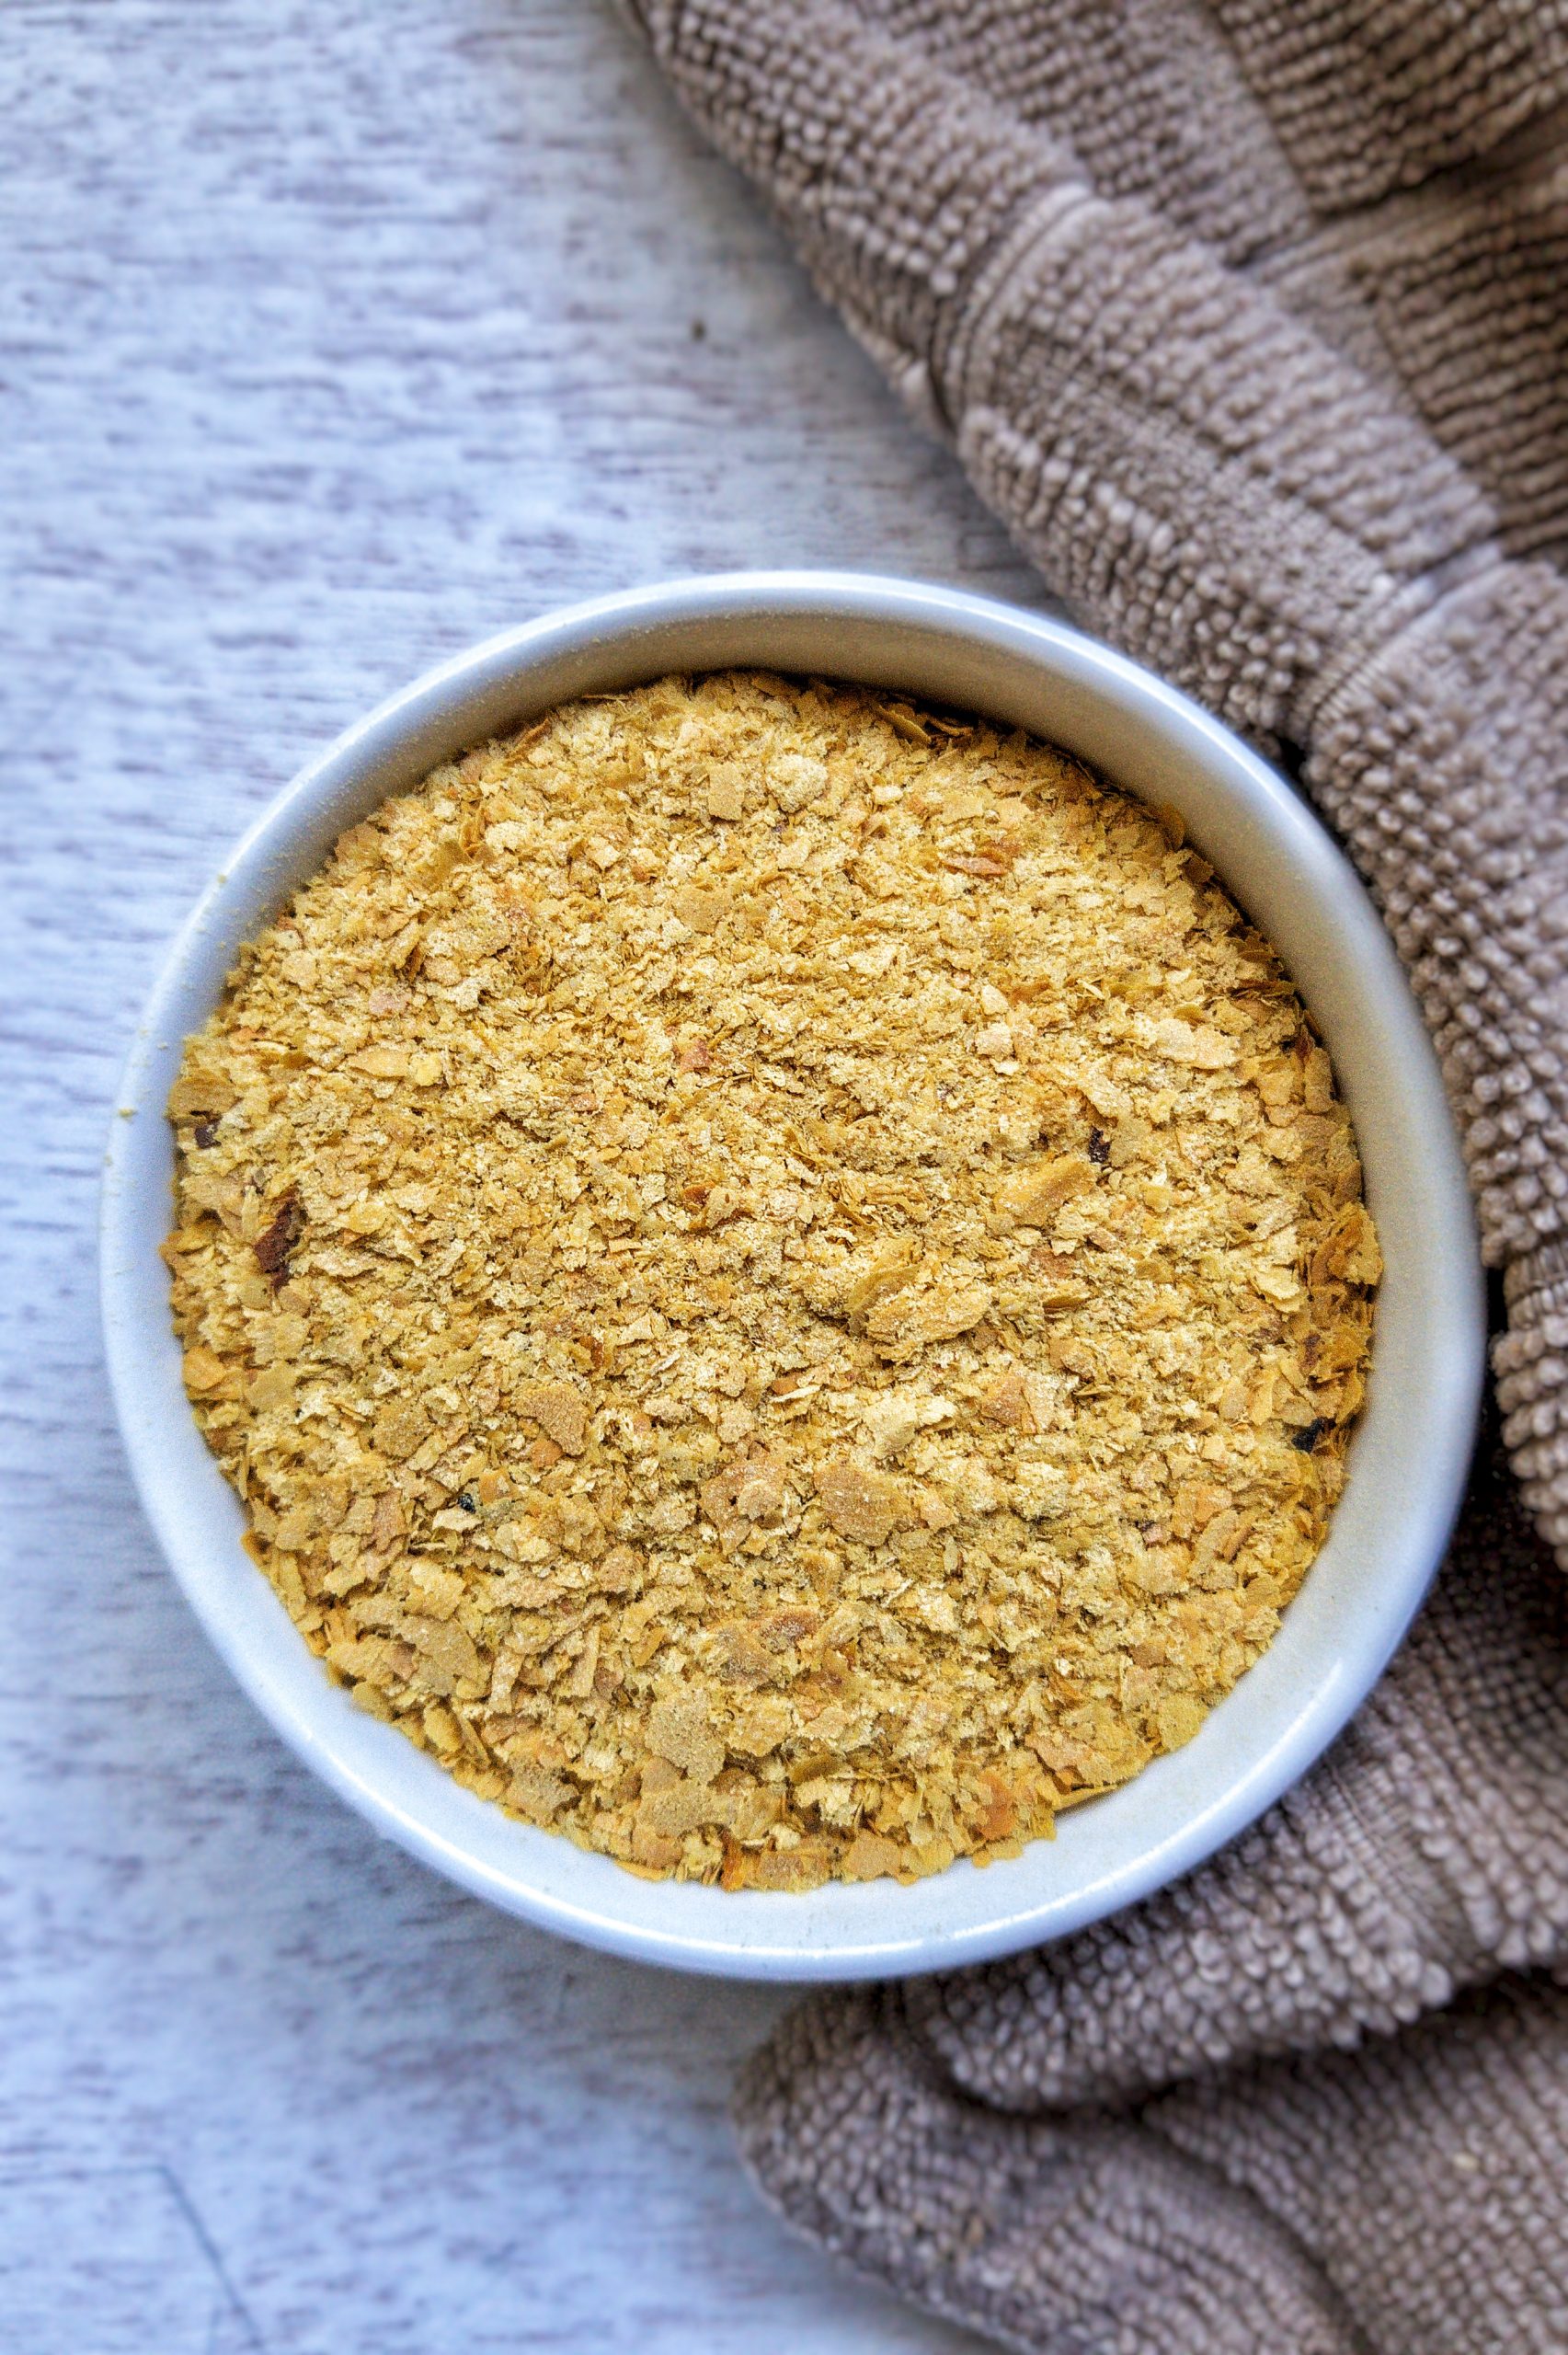 Nutritional yeast in a small, white bowl